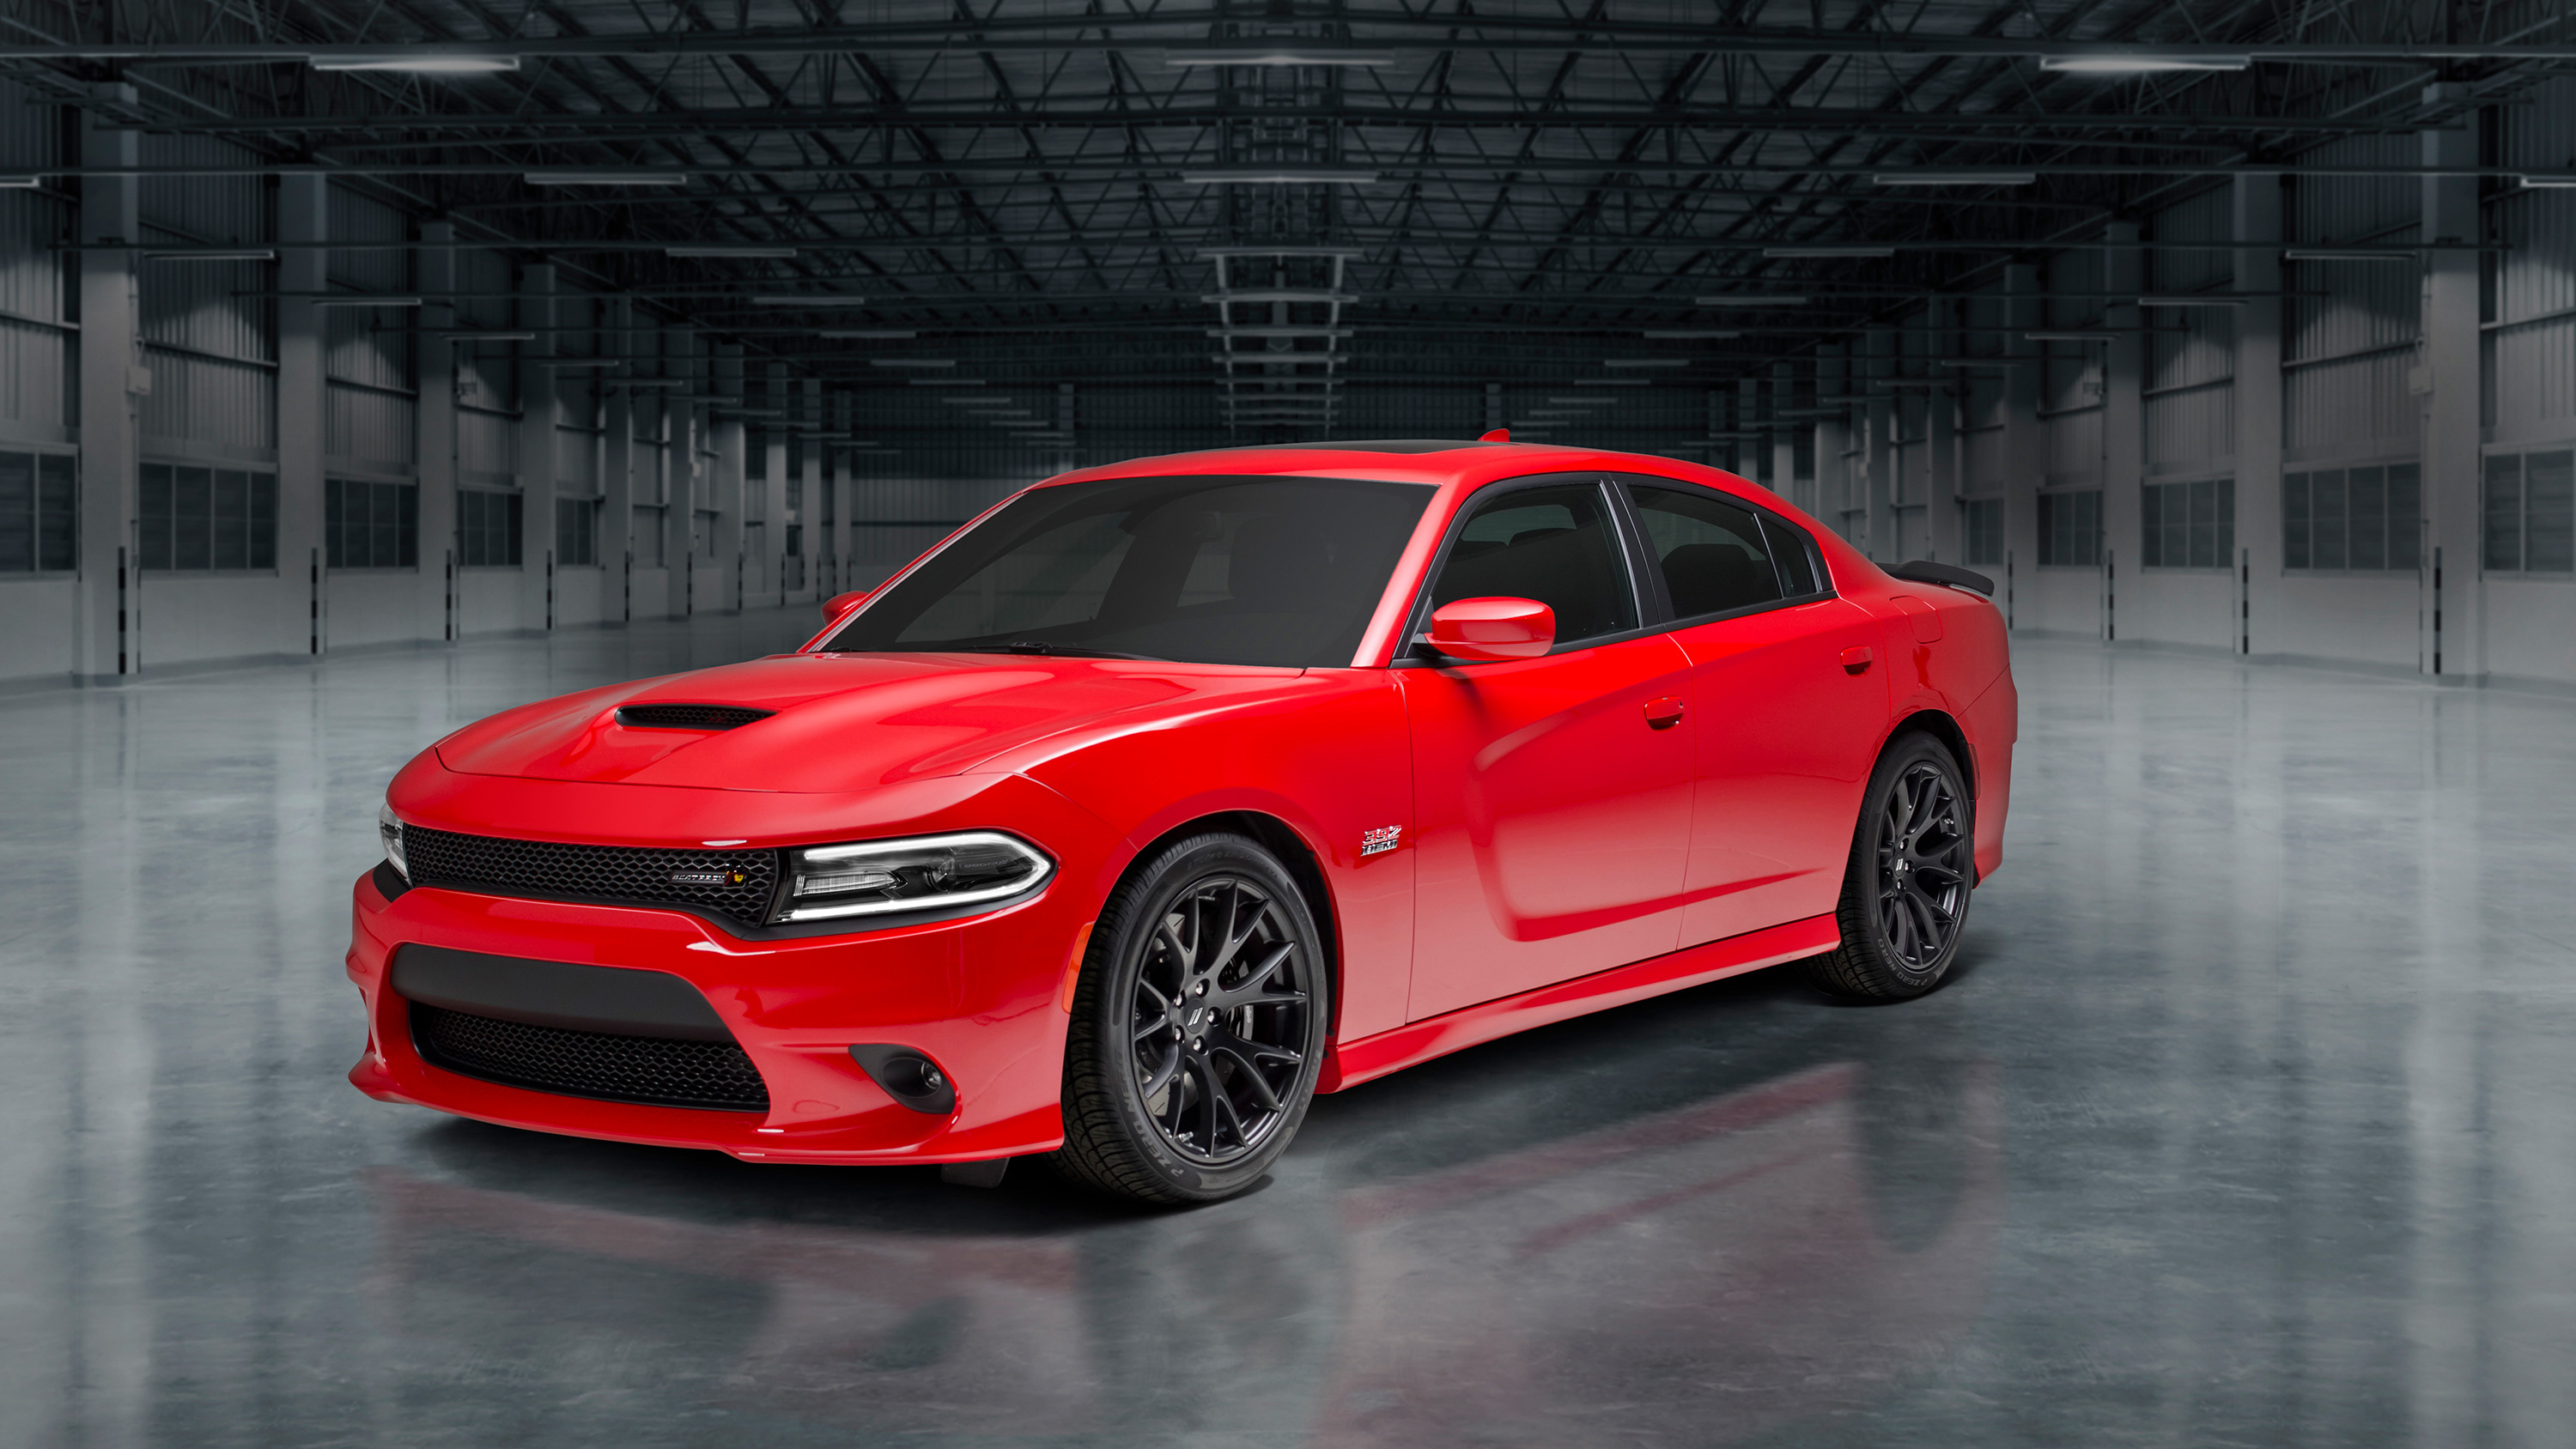 Charger Car Wallpapers